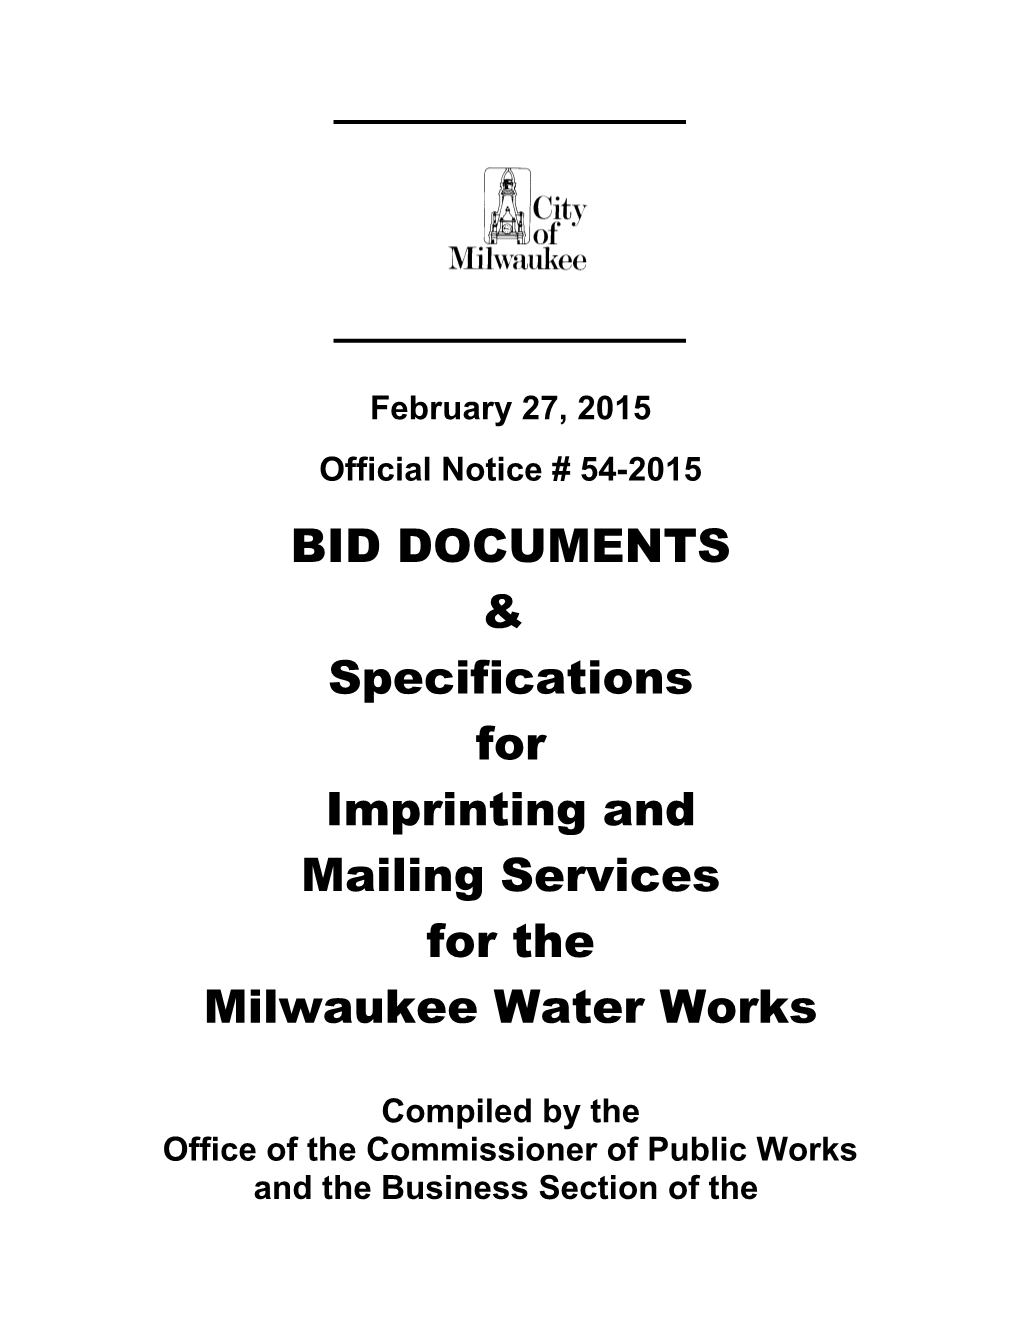 Specifications for Tax Bill Imprinting and Mailing Services for the Office of the City Treasurer